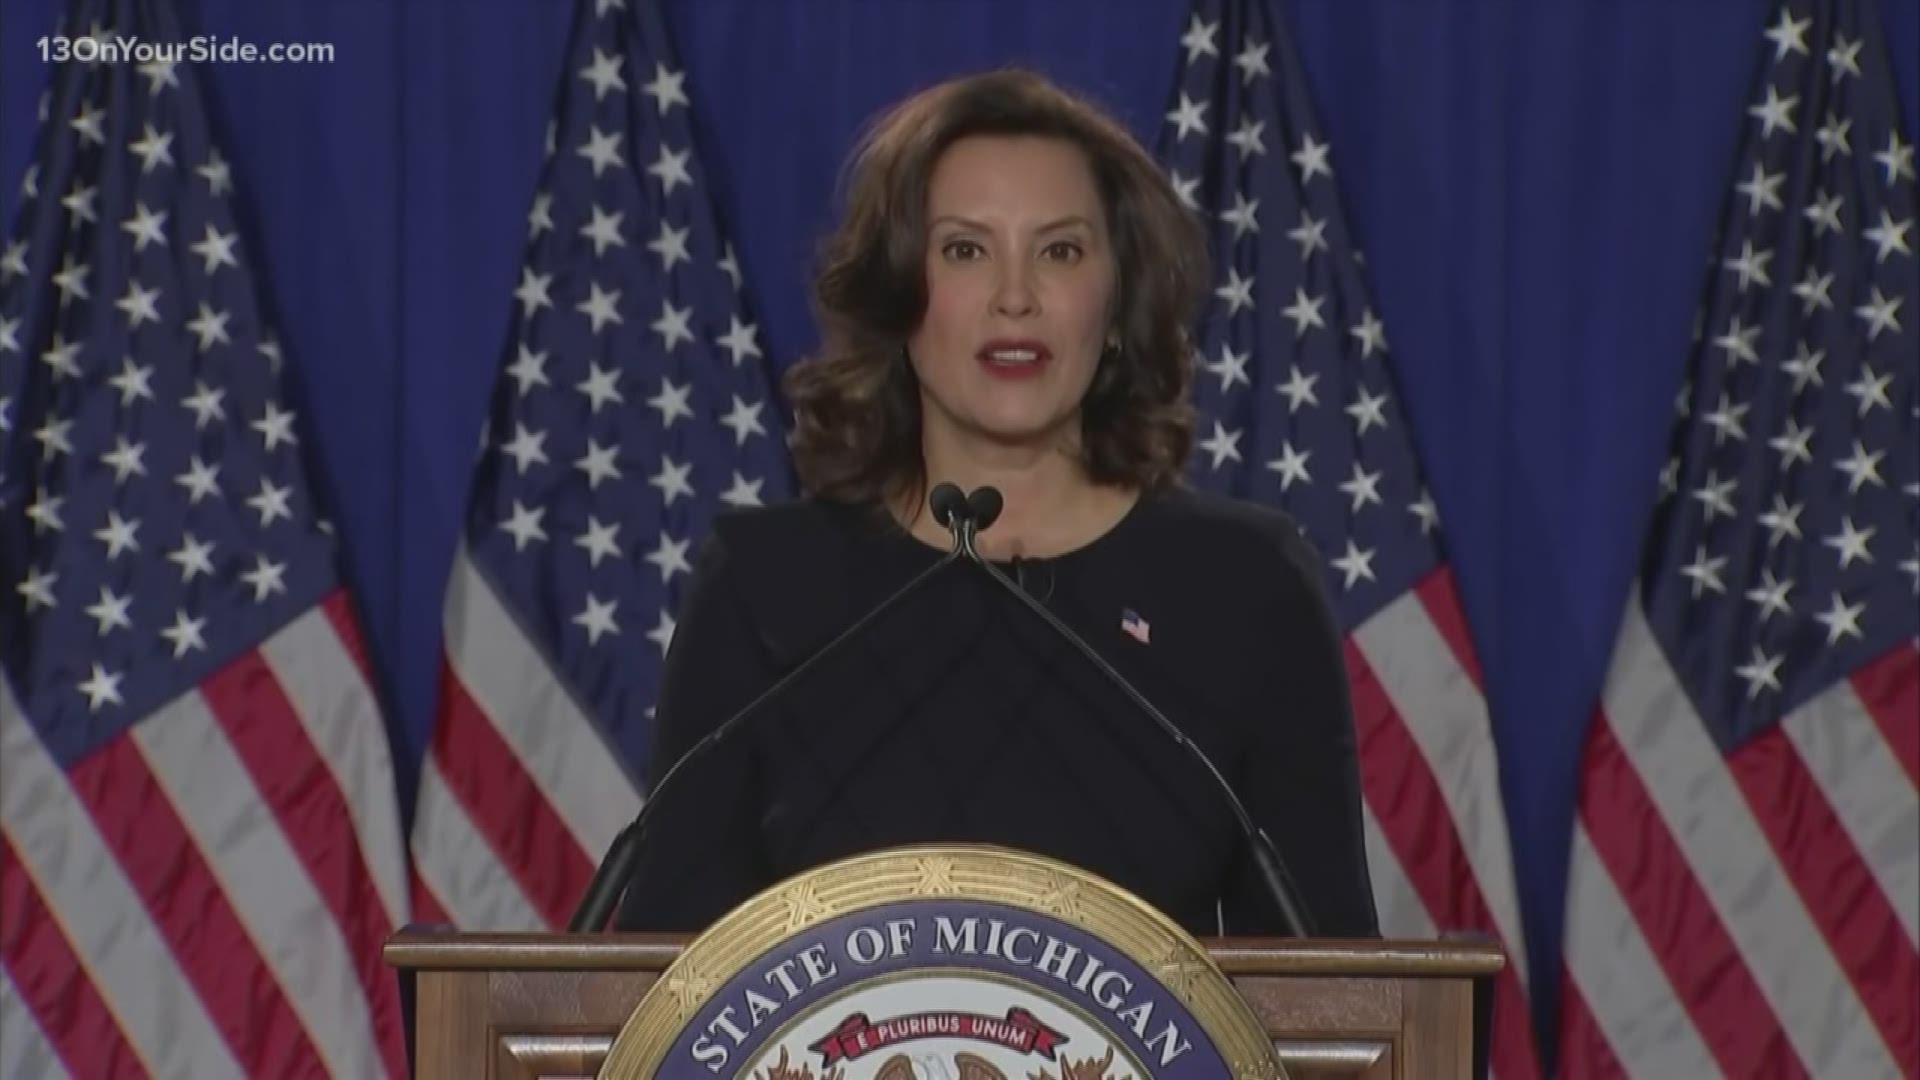 Whitmer was selected by Speaker Nancy Pelosi and Senate Minority Leader Chuck Schumer to give the speech.